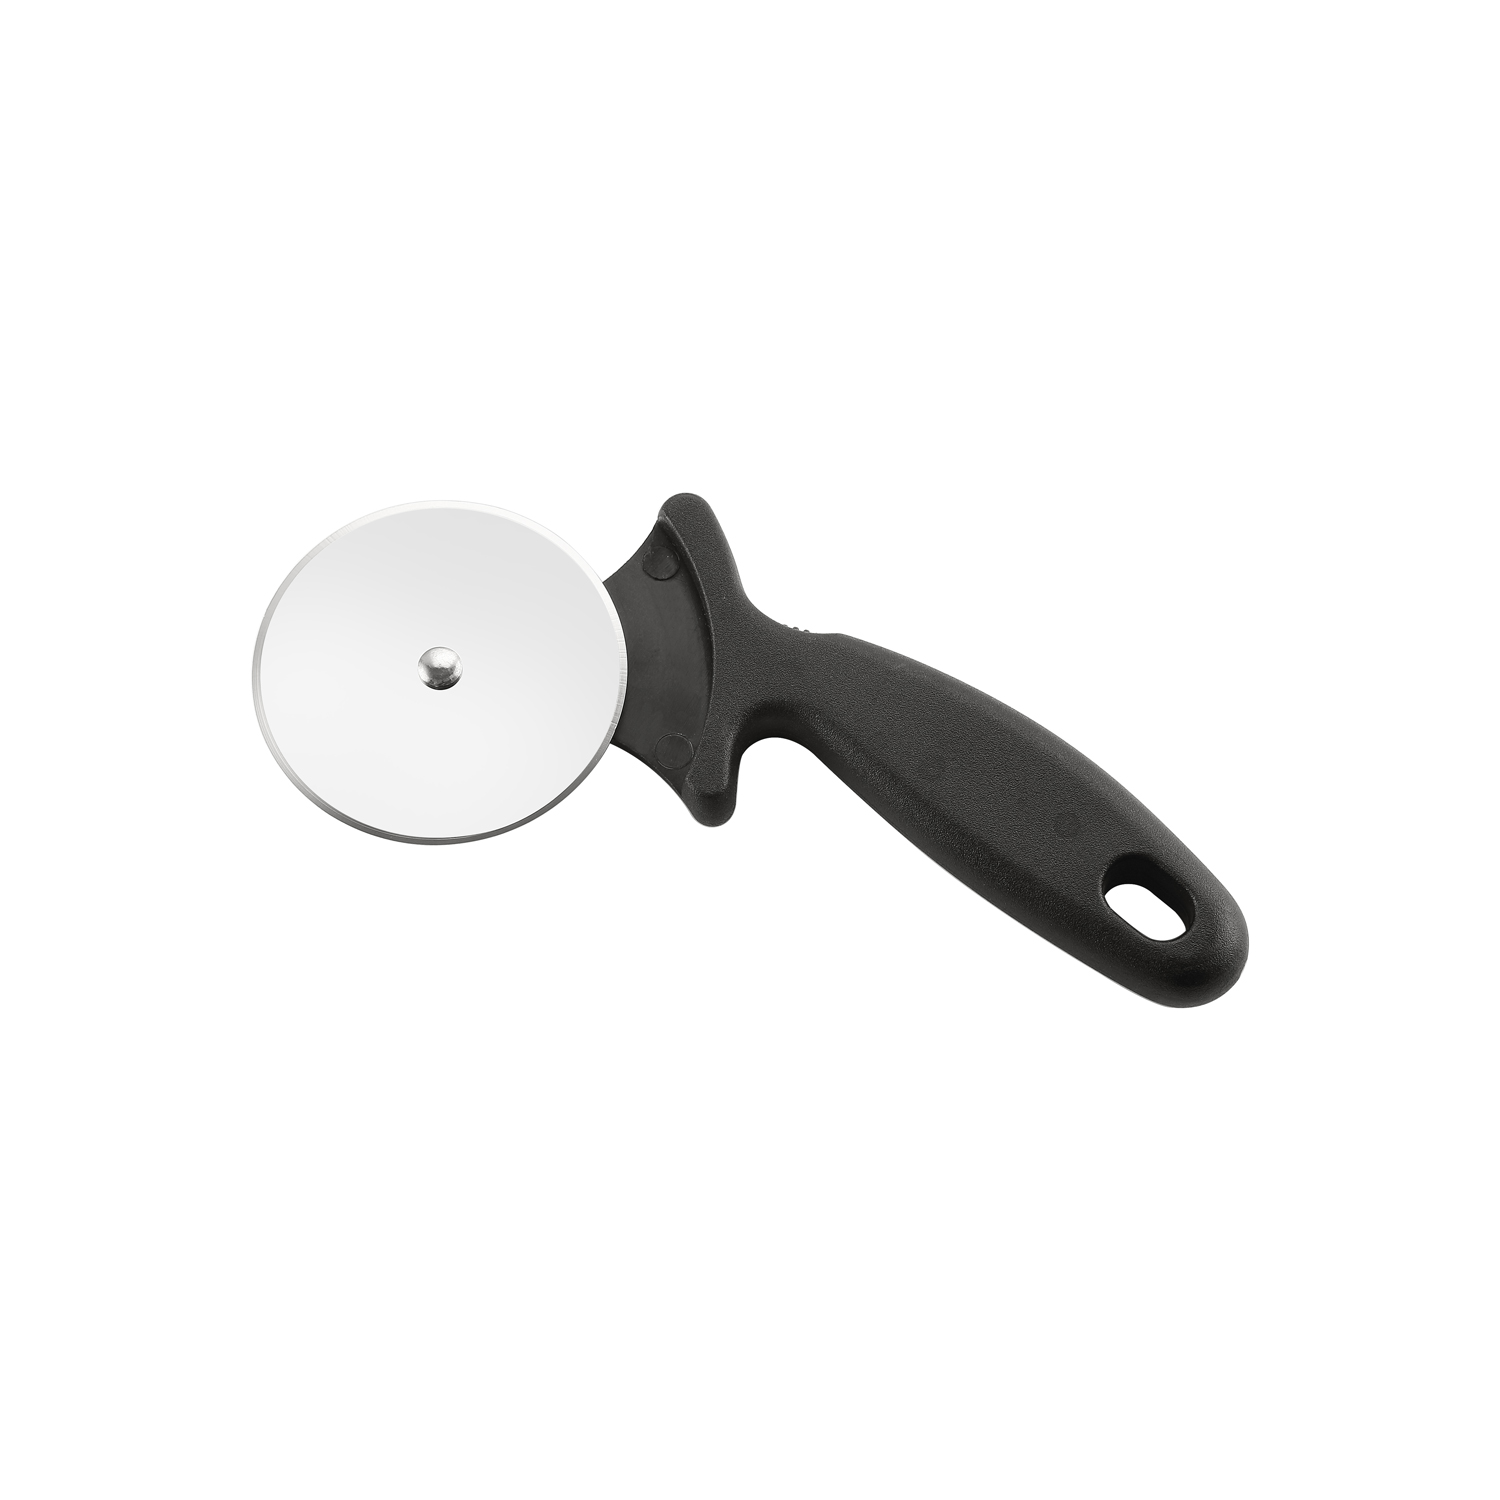 CAC China B15PZ-2K Pizza Cutter with Black Handle 2-1/2" Dia.